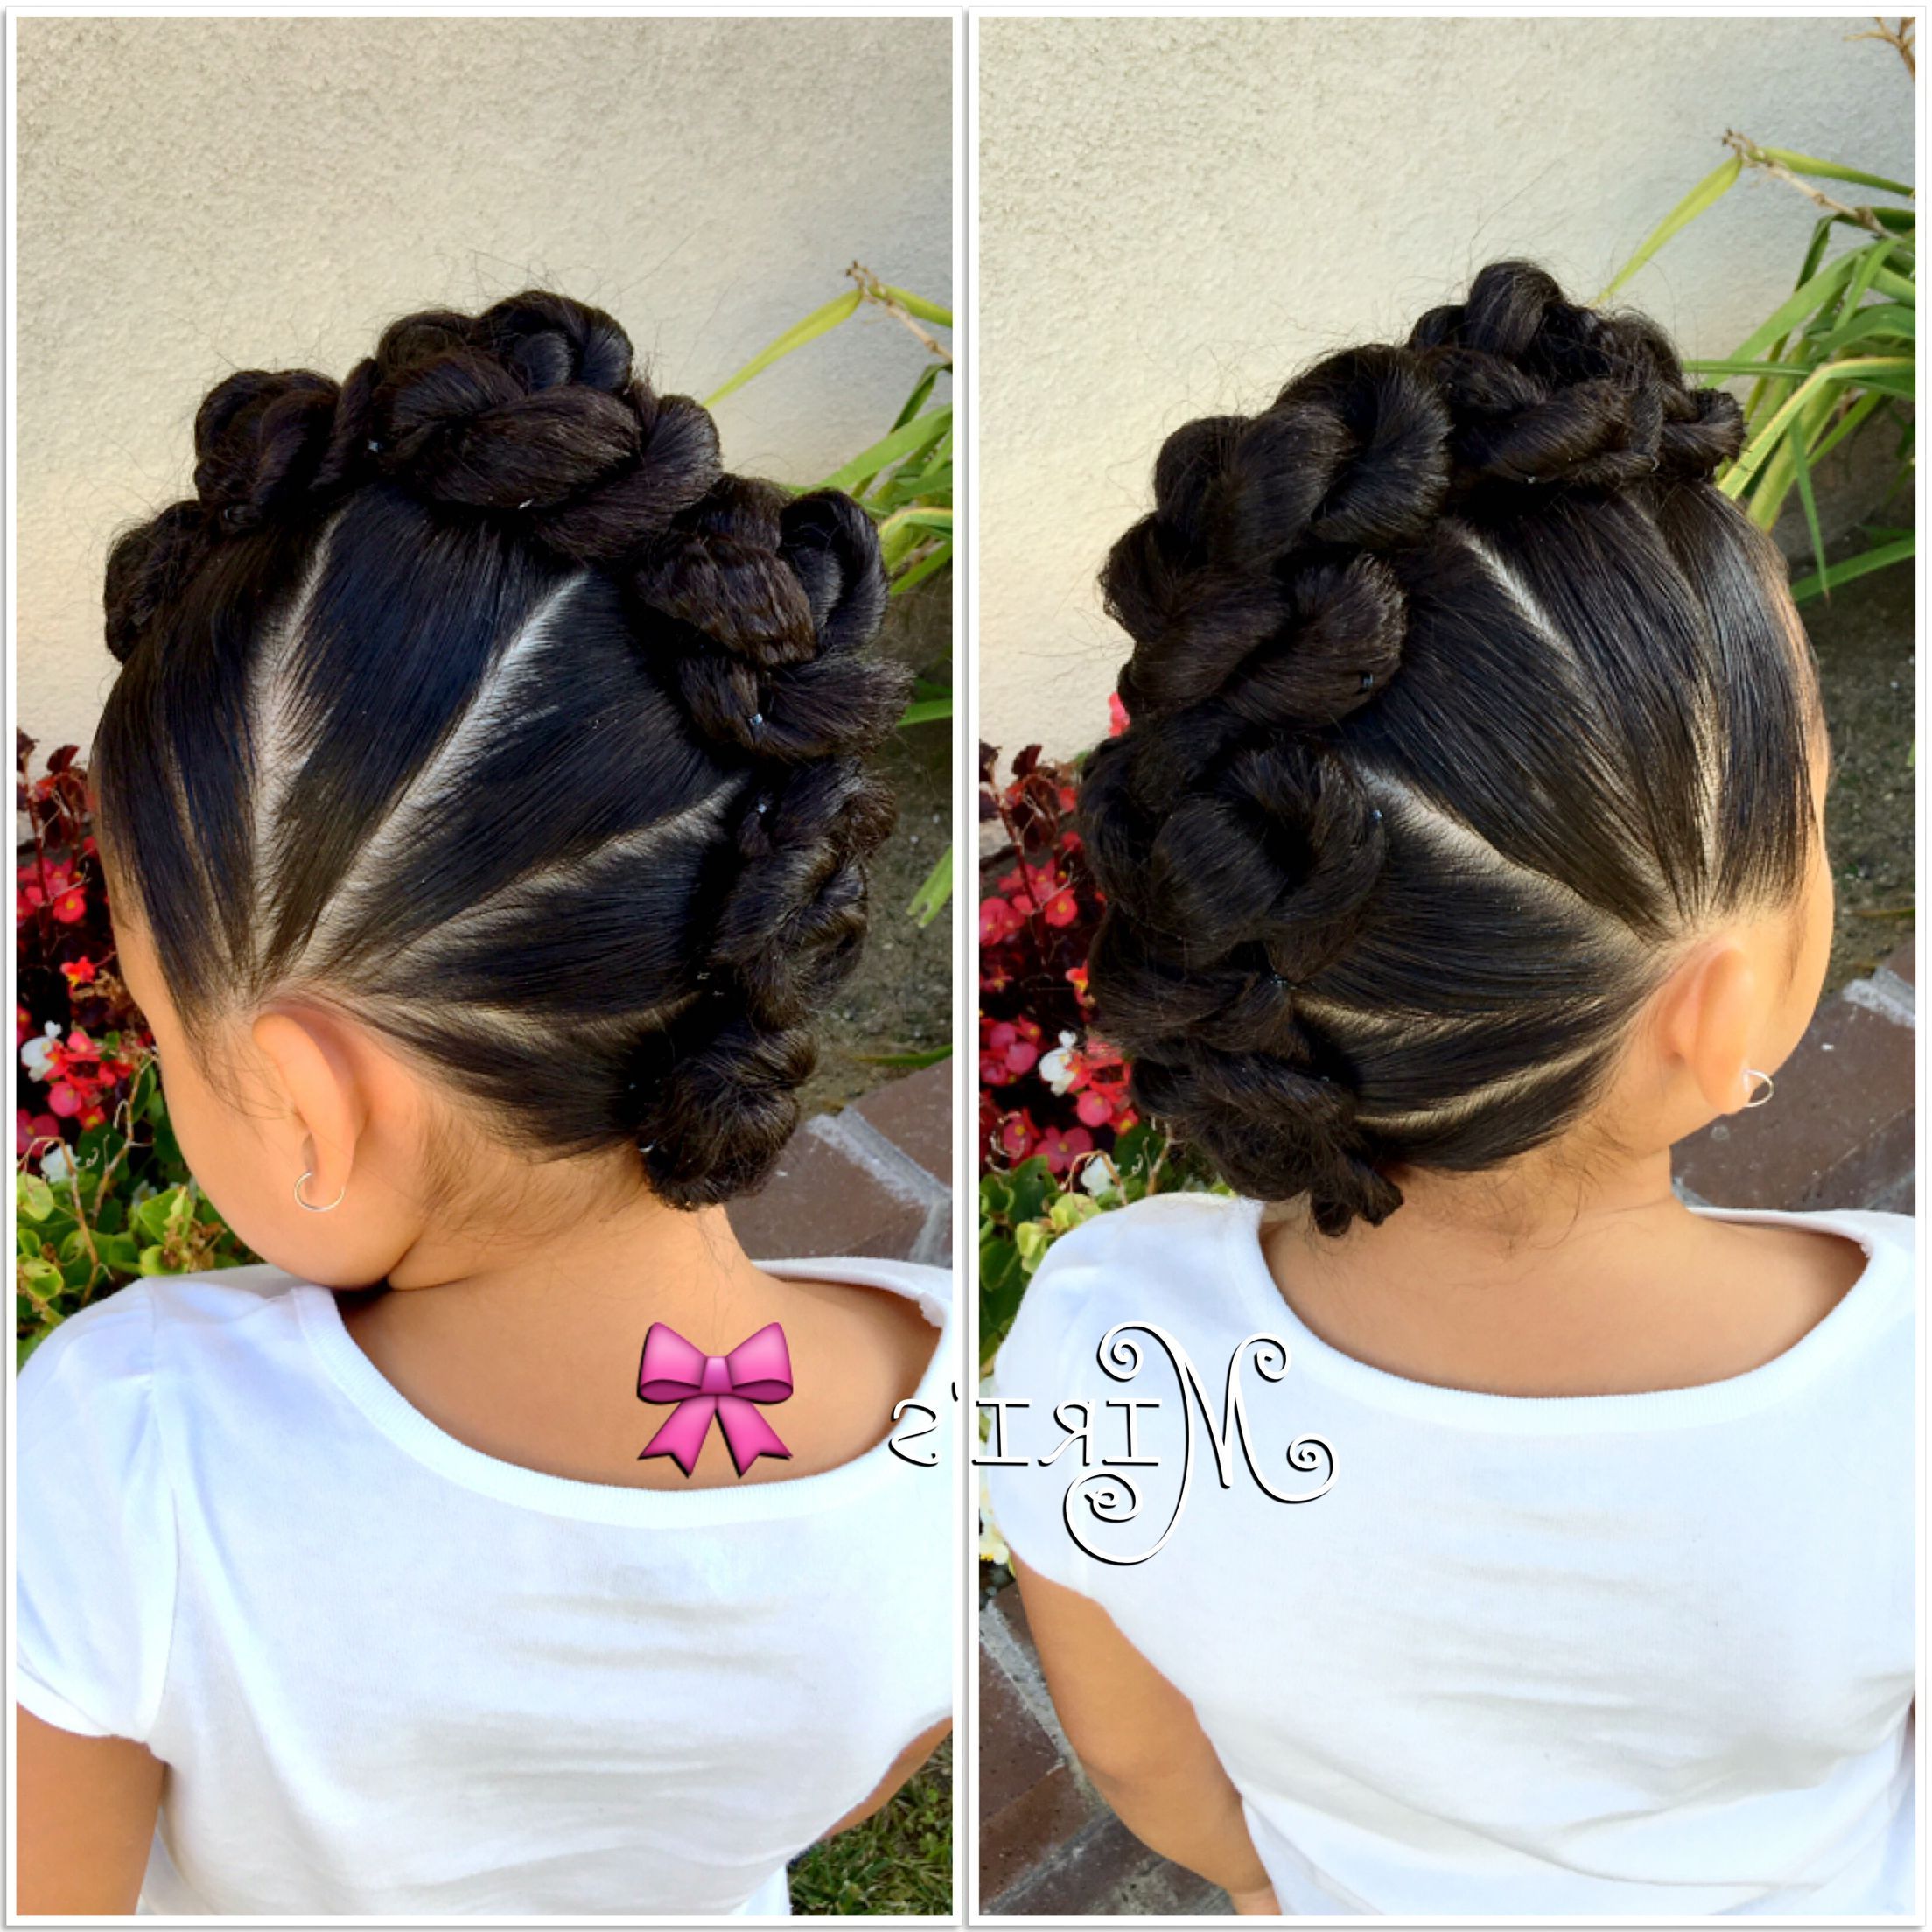 Mohawk With Twists Hair Style For Little Girls (View 3 of 20)